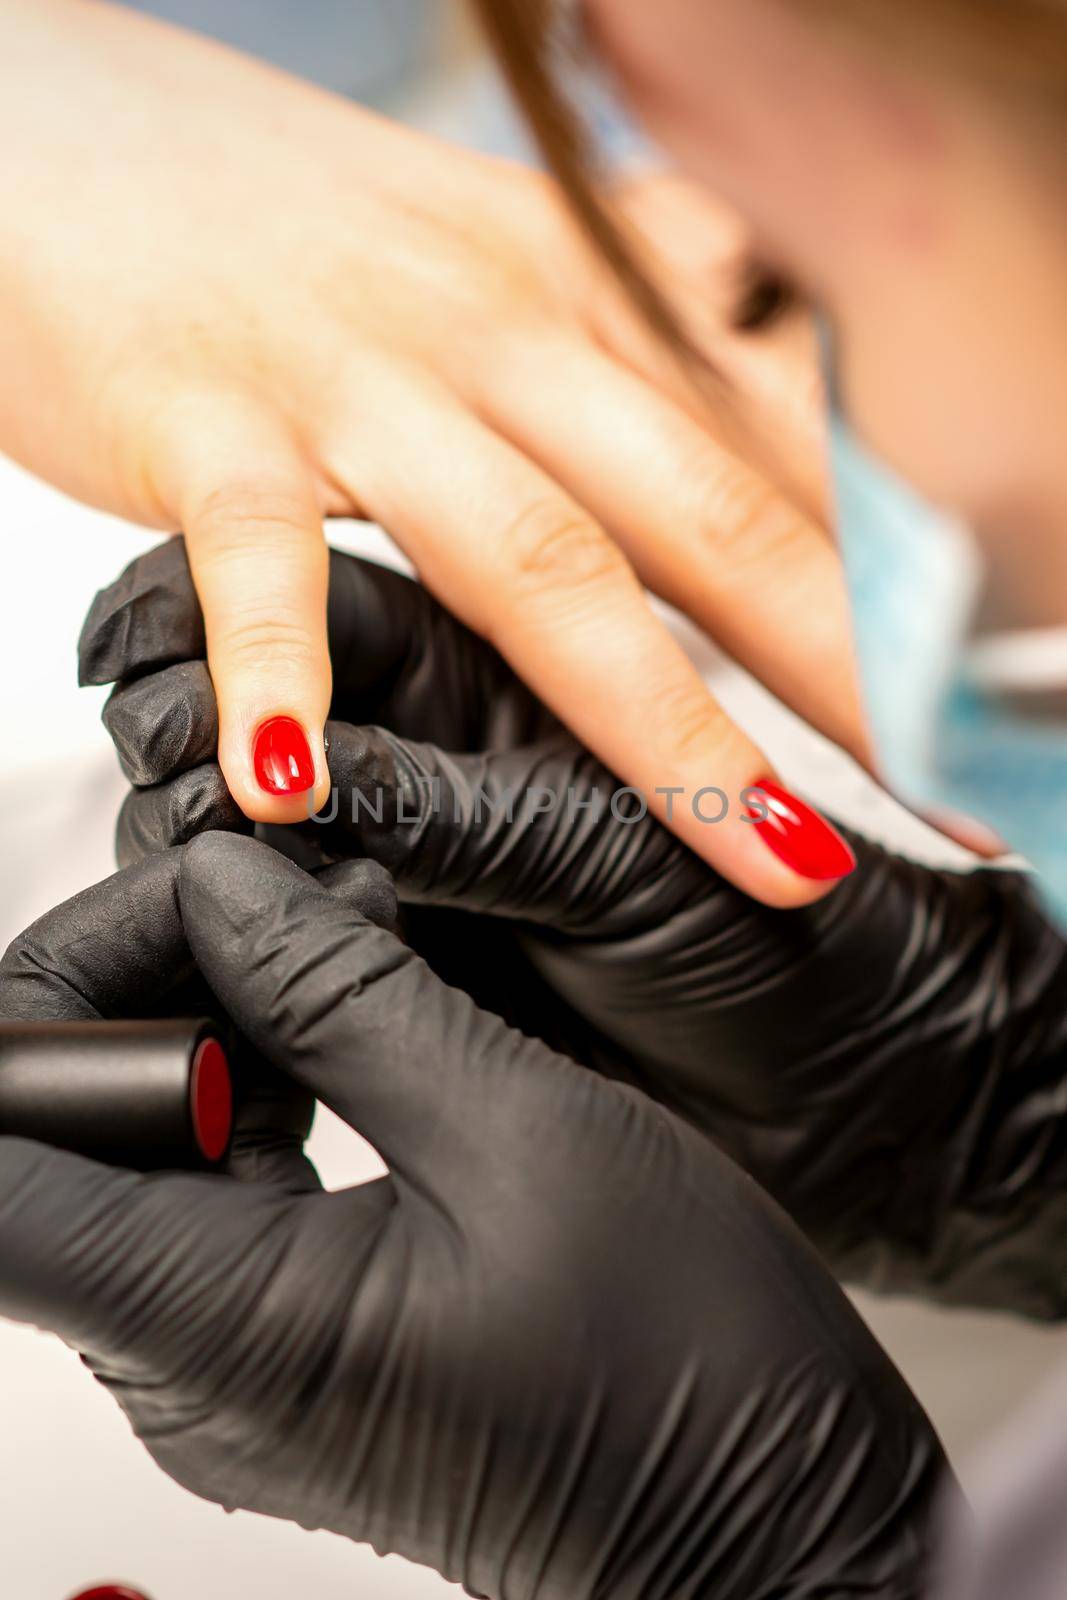 Manicure varnish painting. Close-up of a manicure master wearing rubber black gloves applying red varnish on a female fingernail in the beauty salon